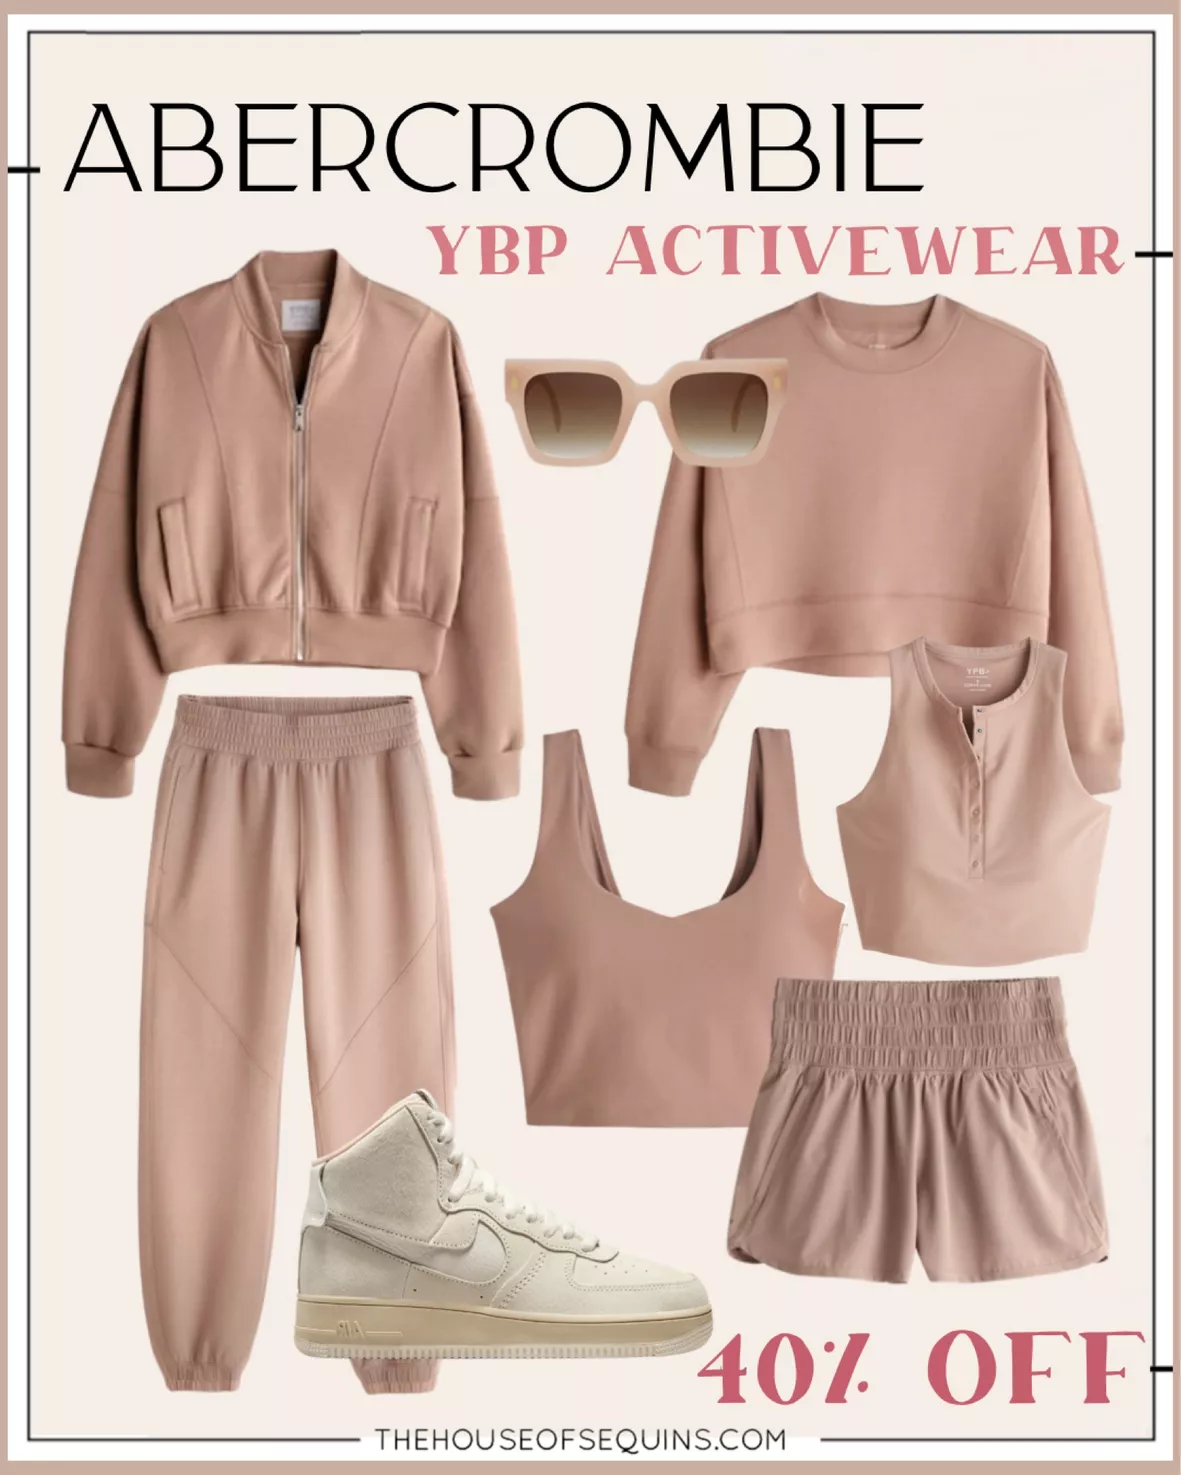 Women's Activewear Clothing: YPB by Abercrombie